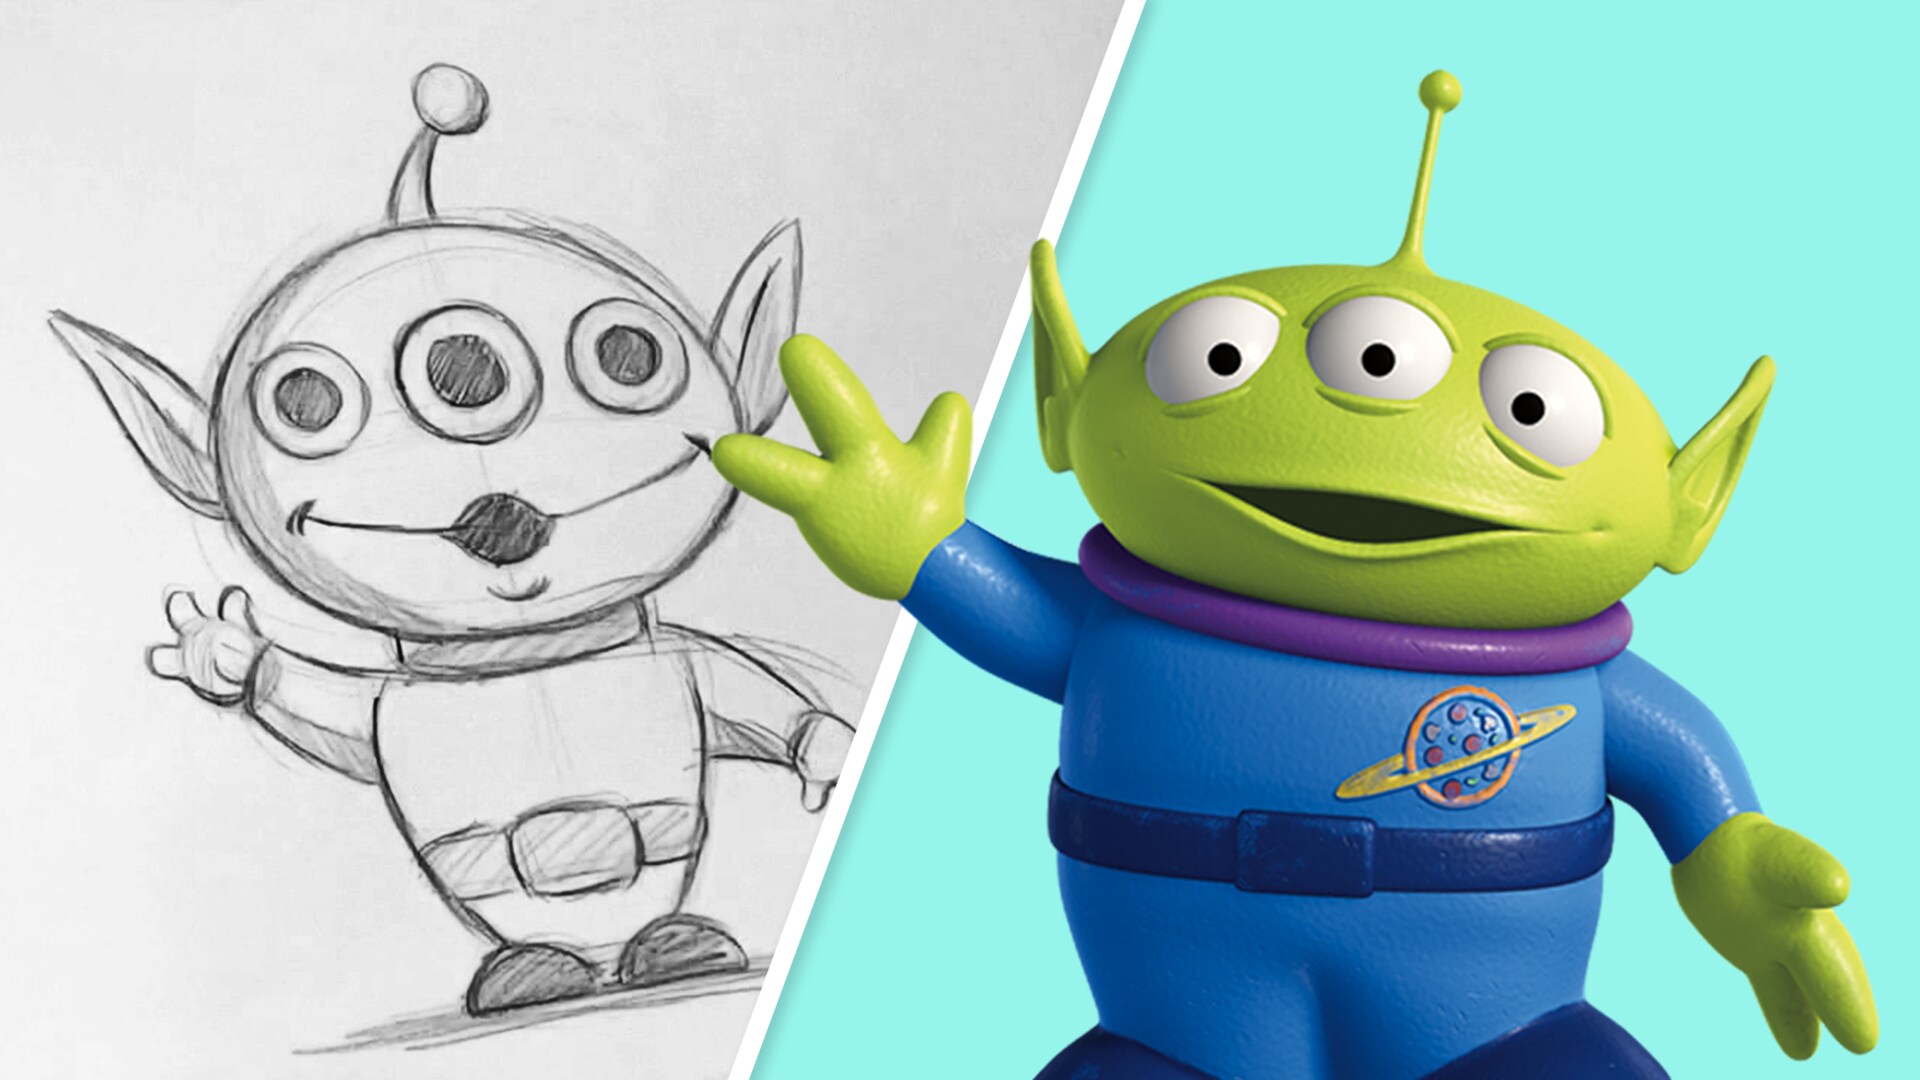 100+] Toy Story Alien Wallpapers